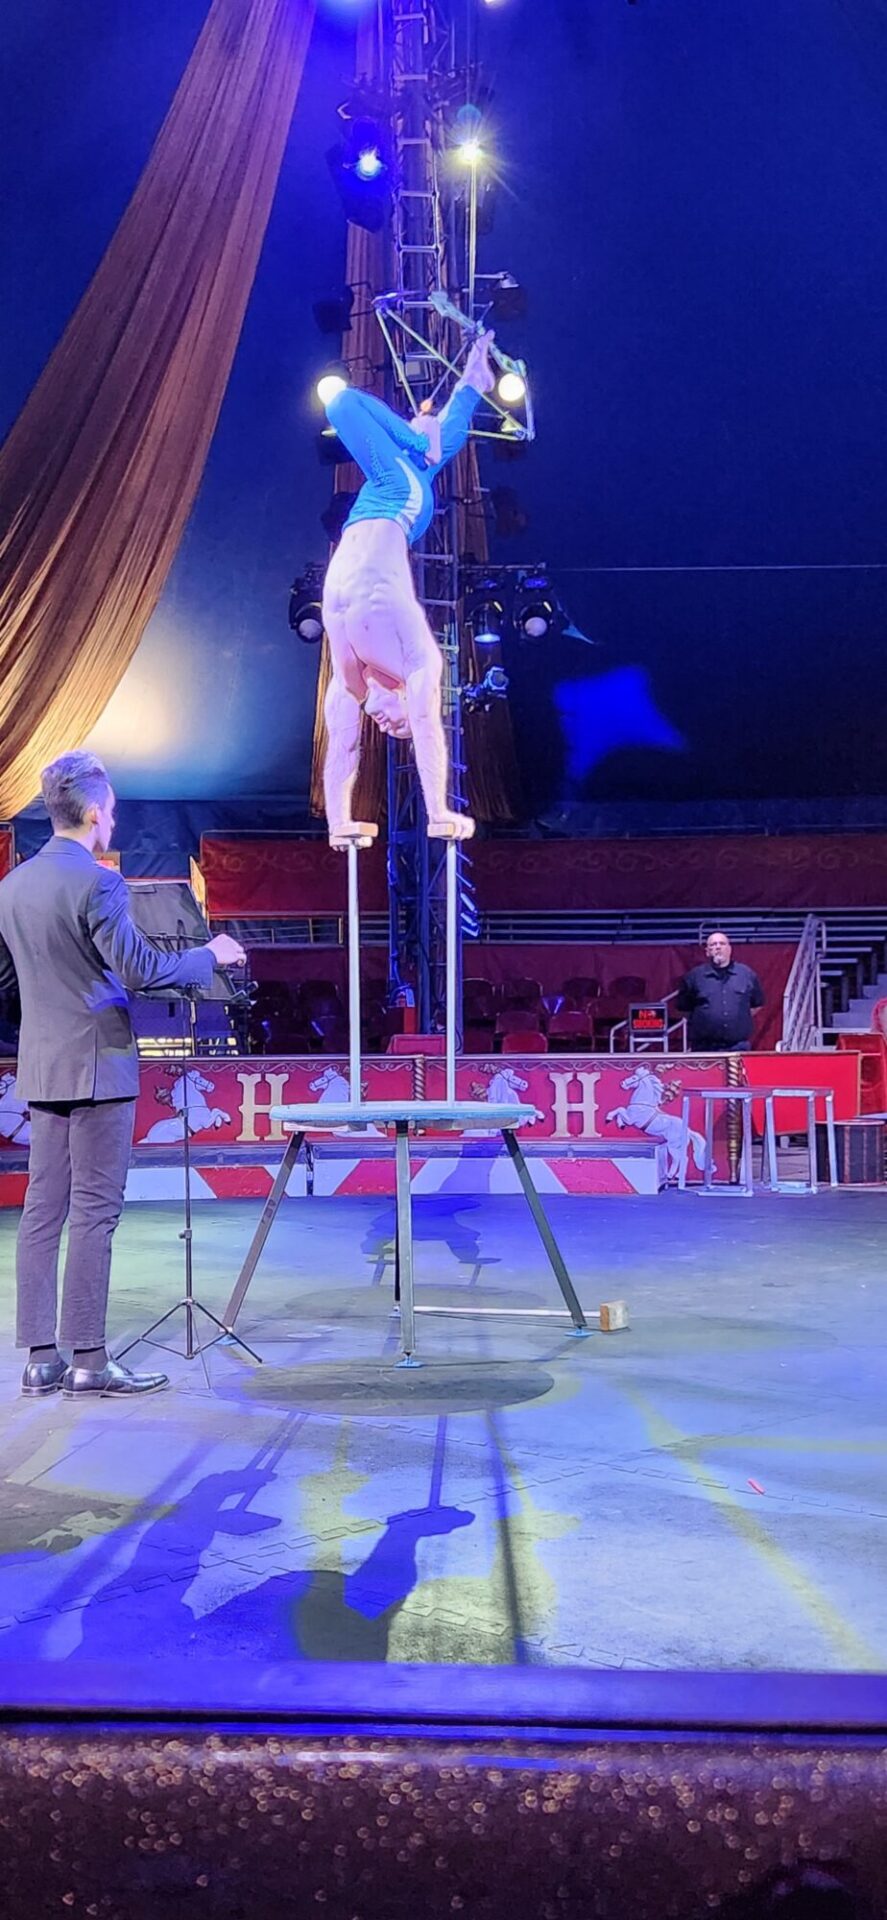 Acrobats in the circus